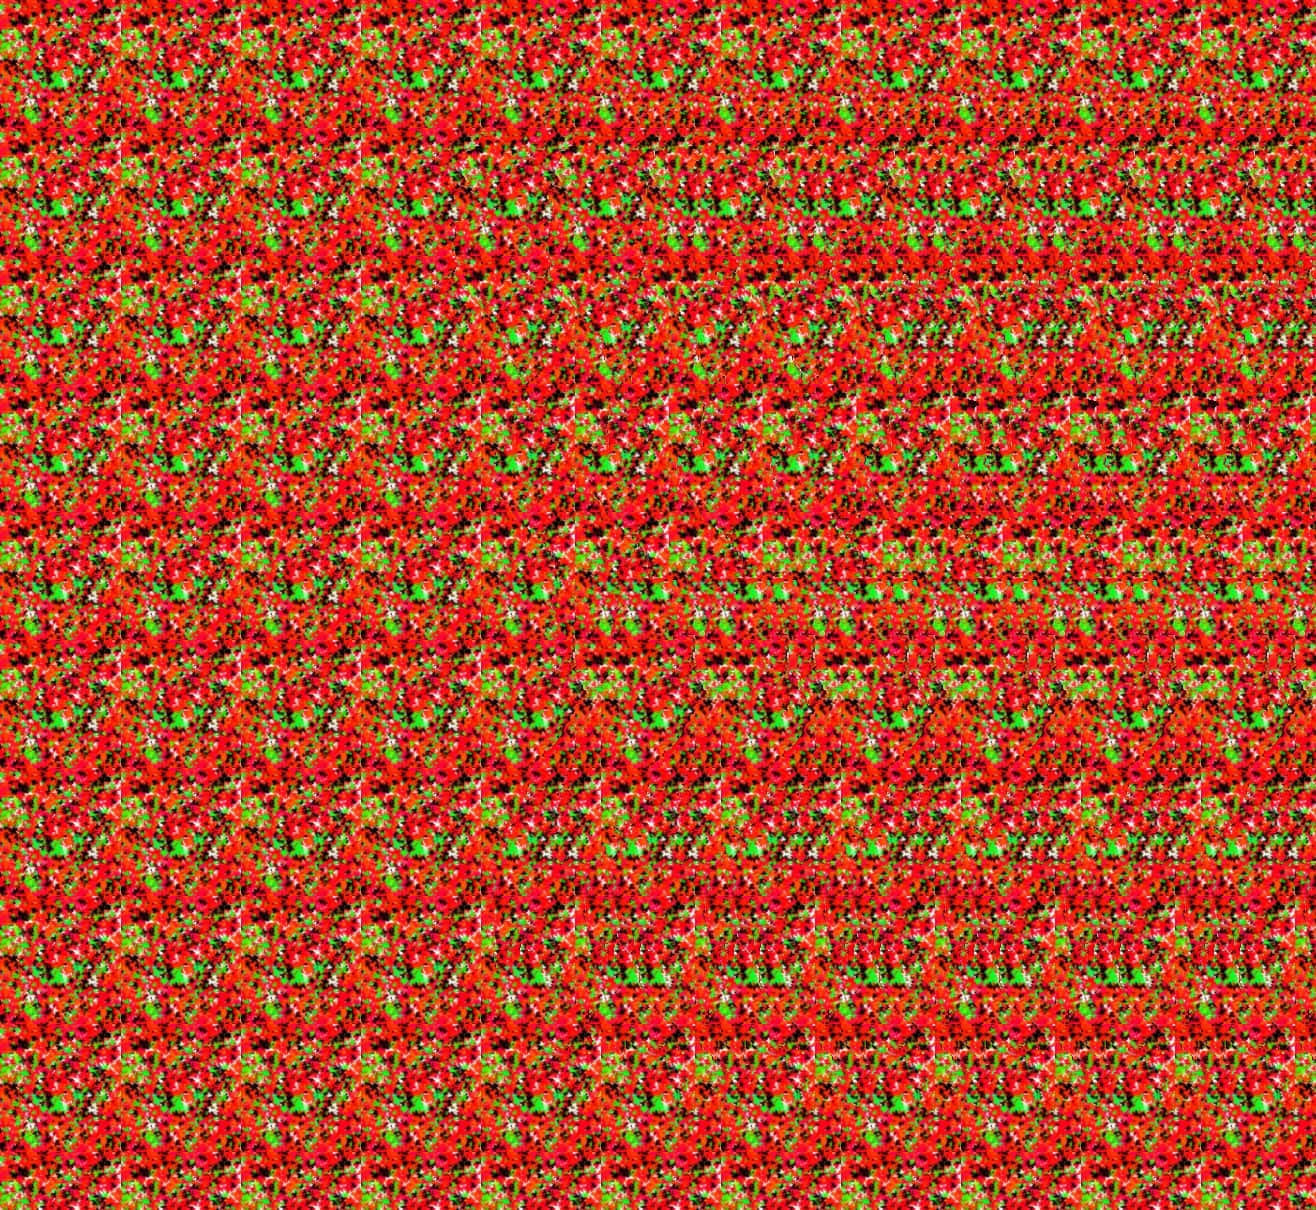 A Red And Green Pattern With A Lot Of Small Red And Green Dots